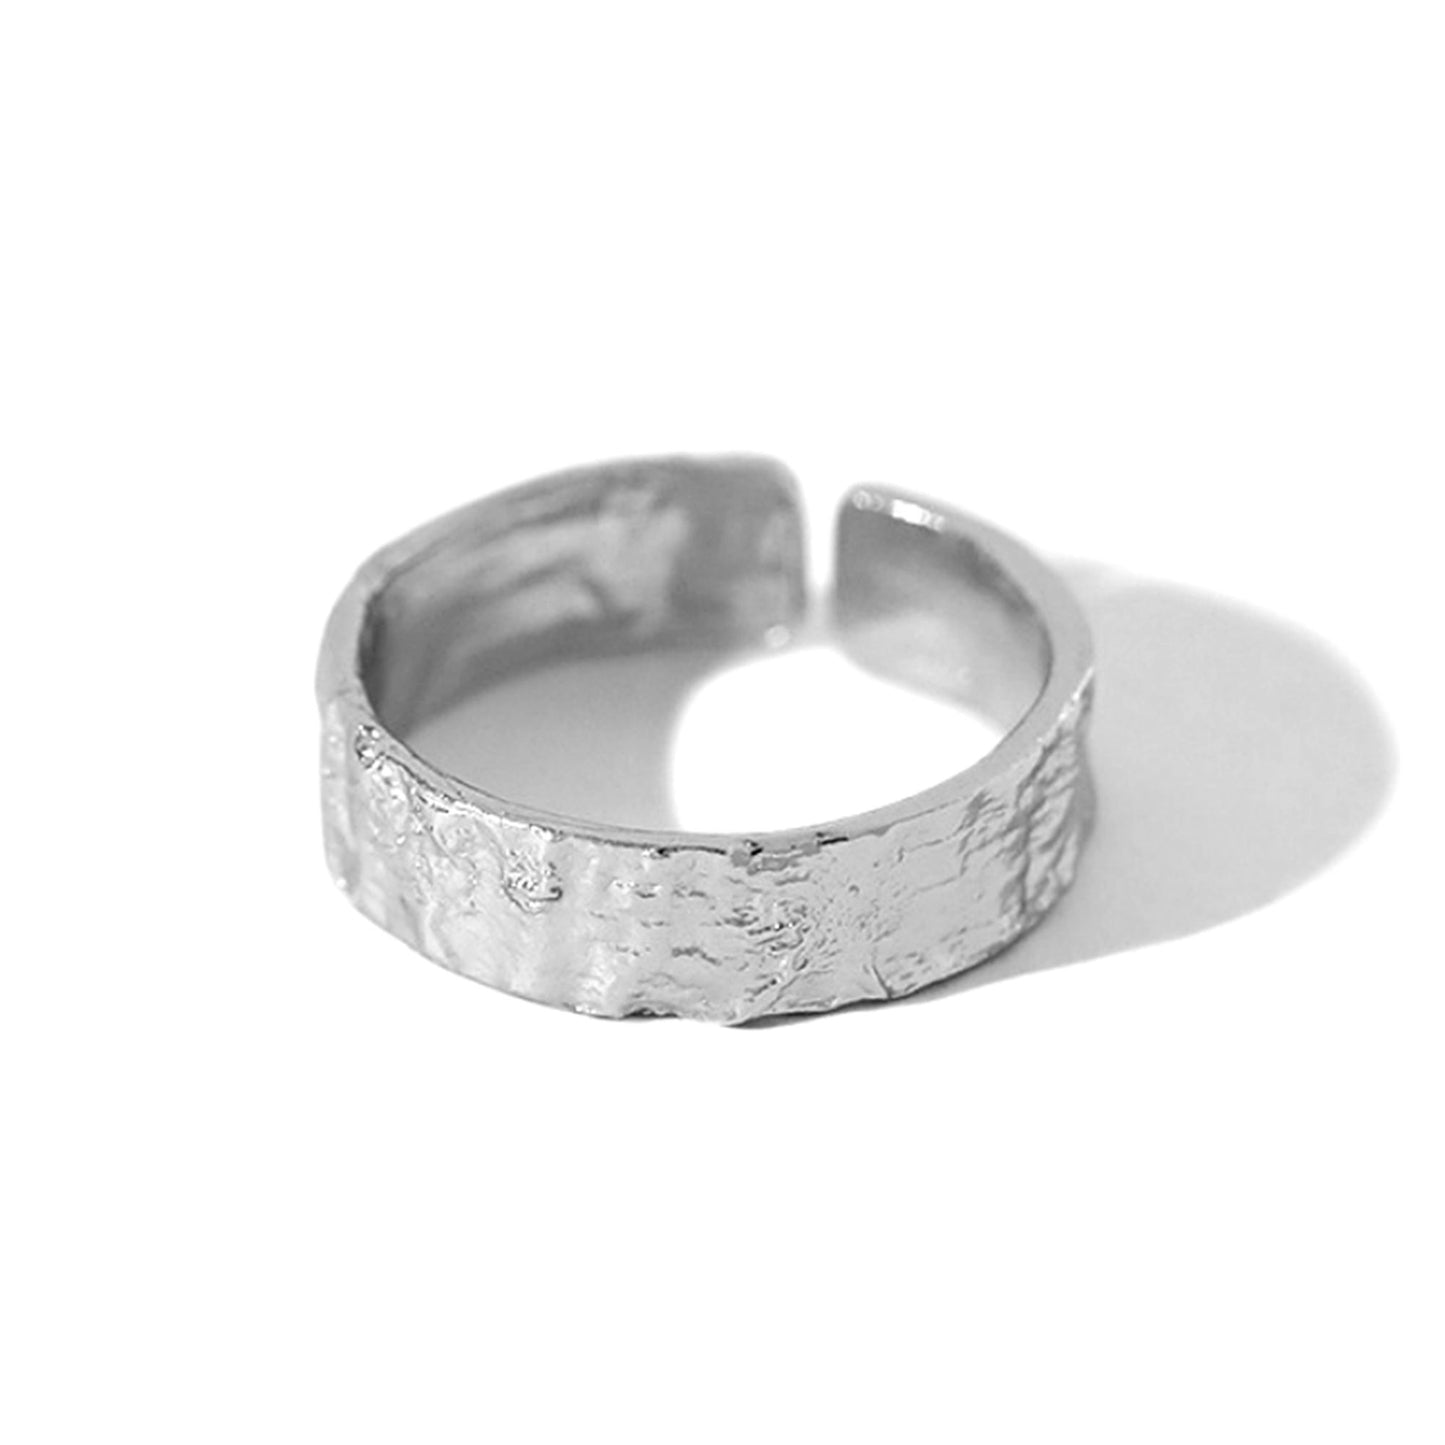 Sterling Silver Hammered Foil Textured Shiny 5mm Width Open Band Ring Unisex - sugarkittenlondon